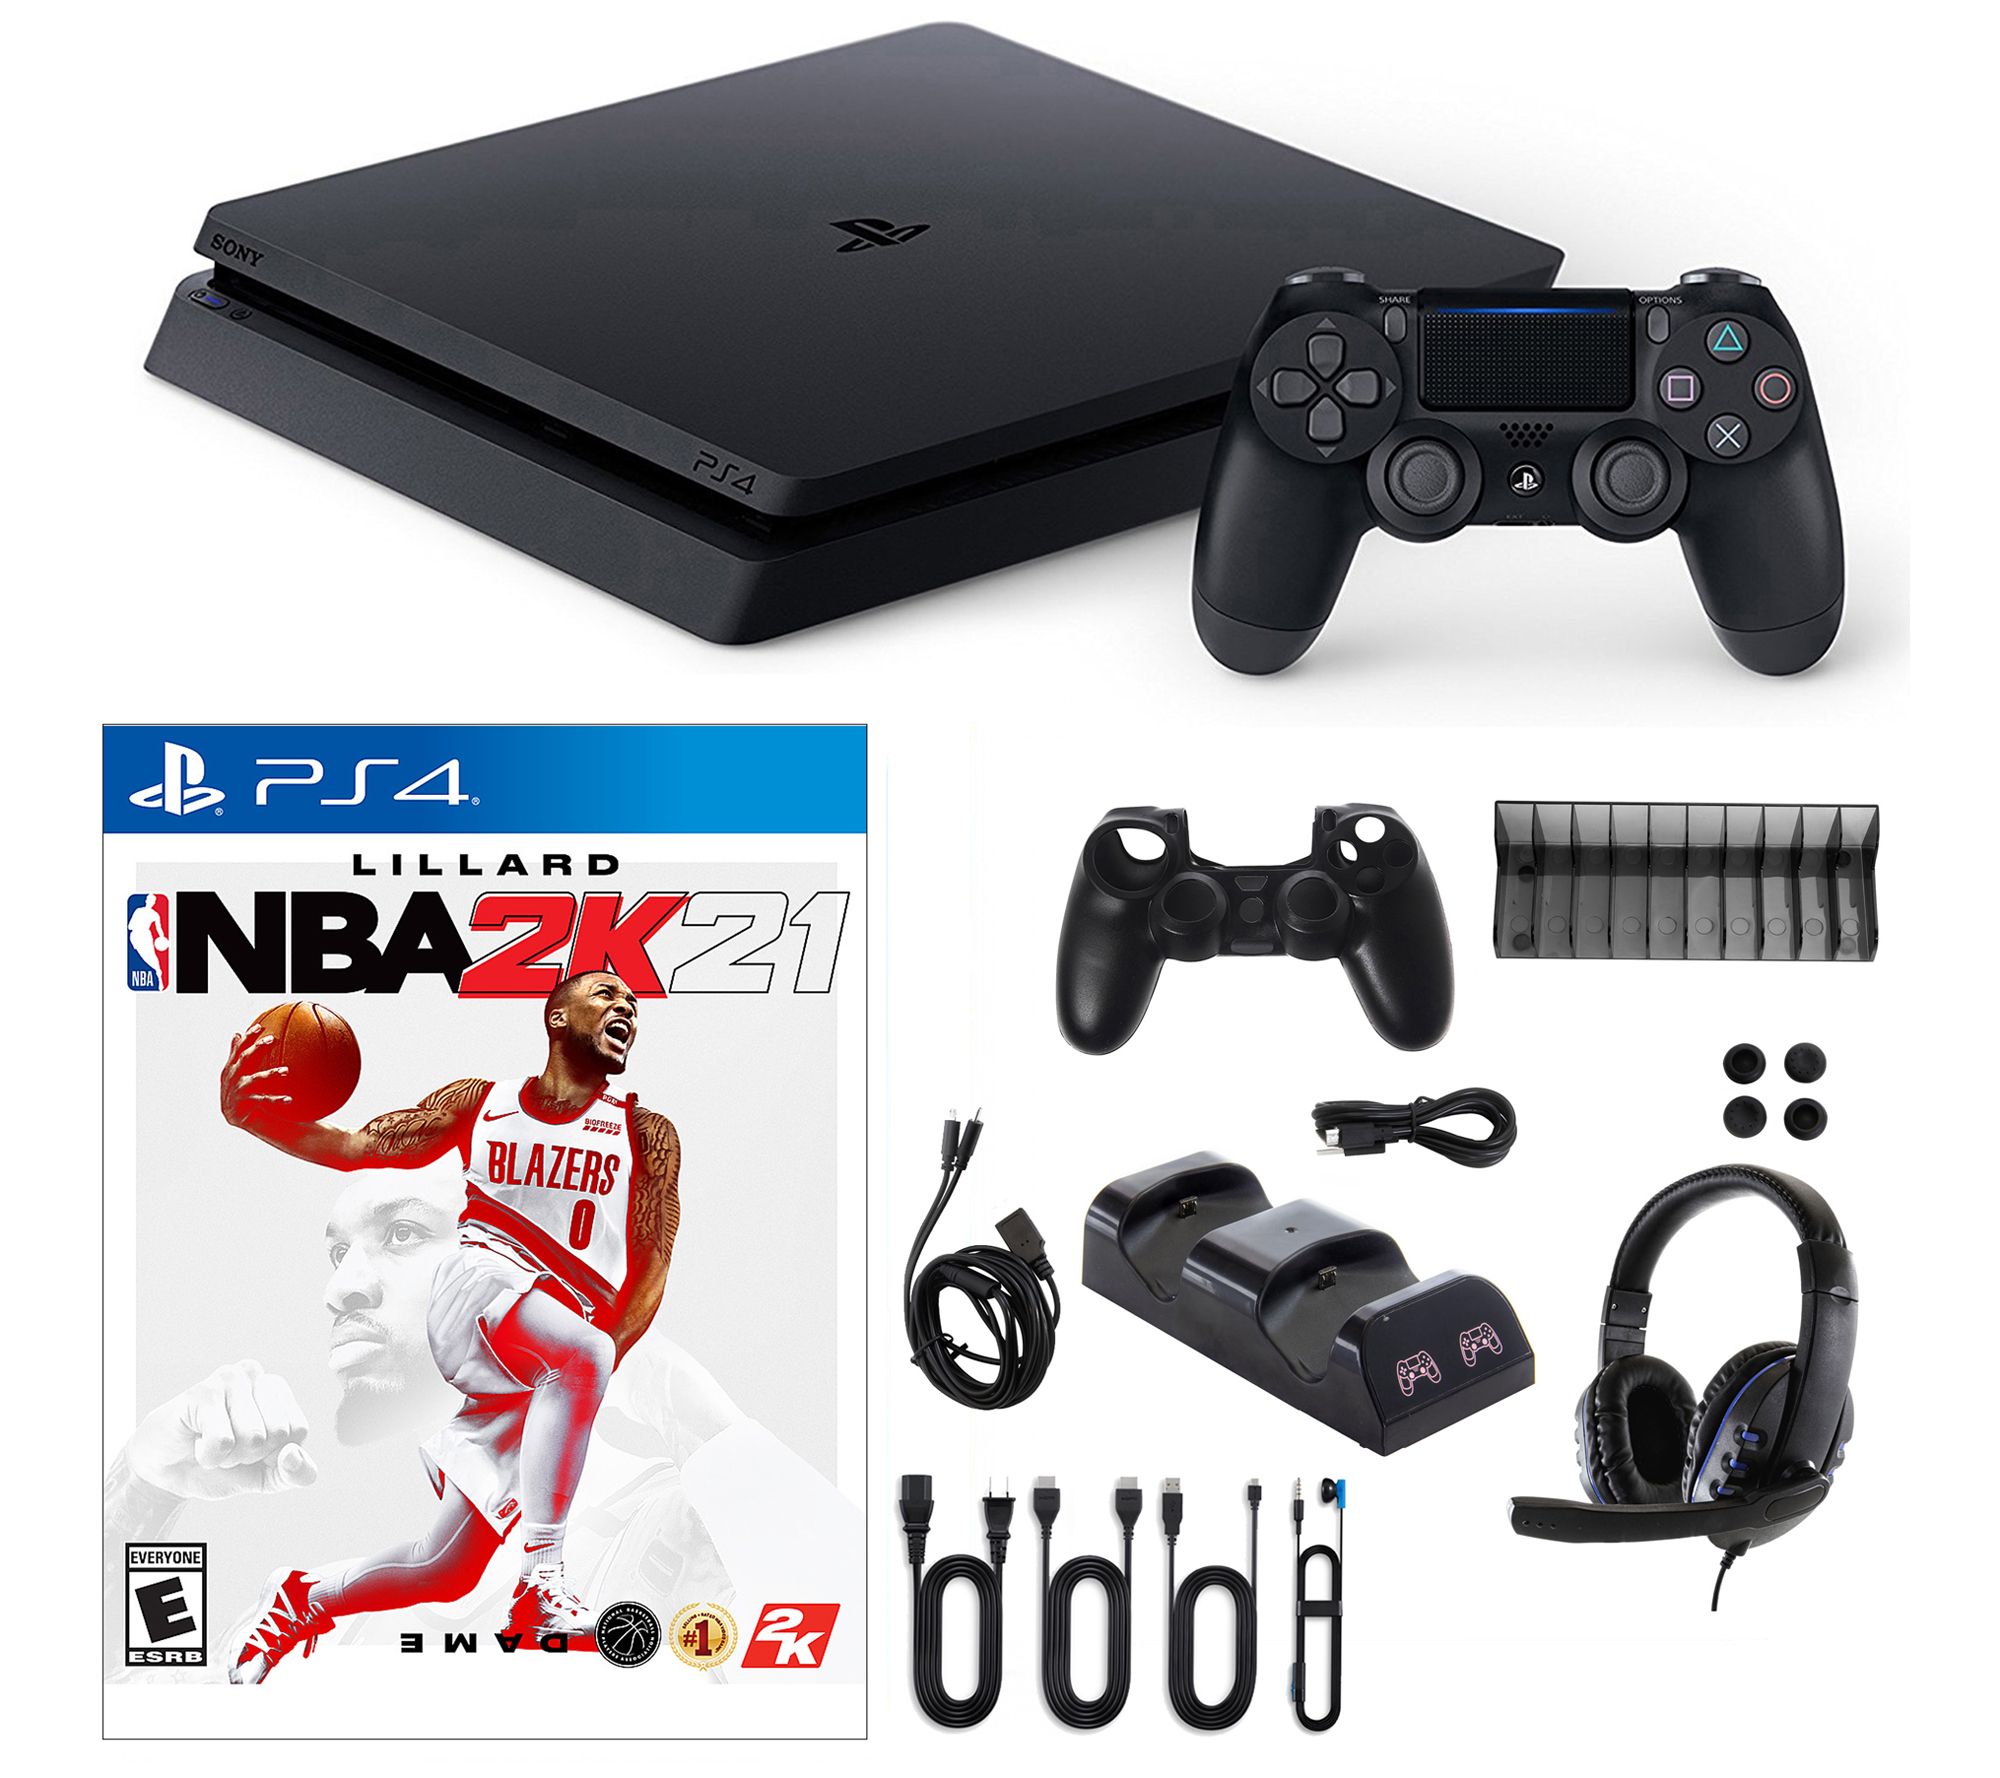 NBA 2K21 (Sony Playstation 4, PS4) Video Game Brand New &